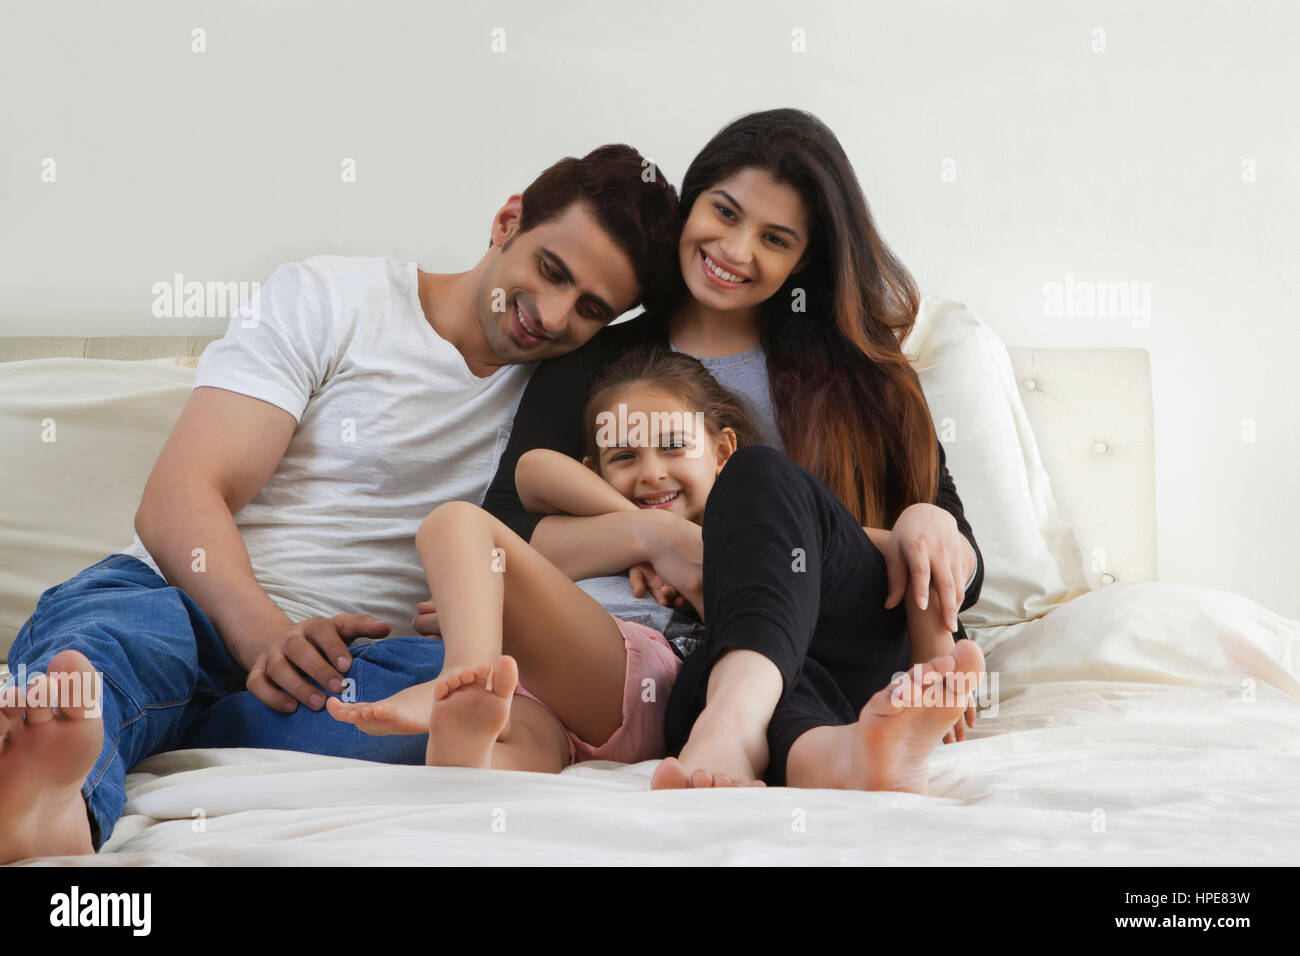 Smiling parents with daughter sitting on bed Banque D'Images